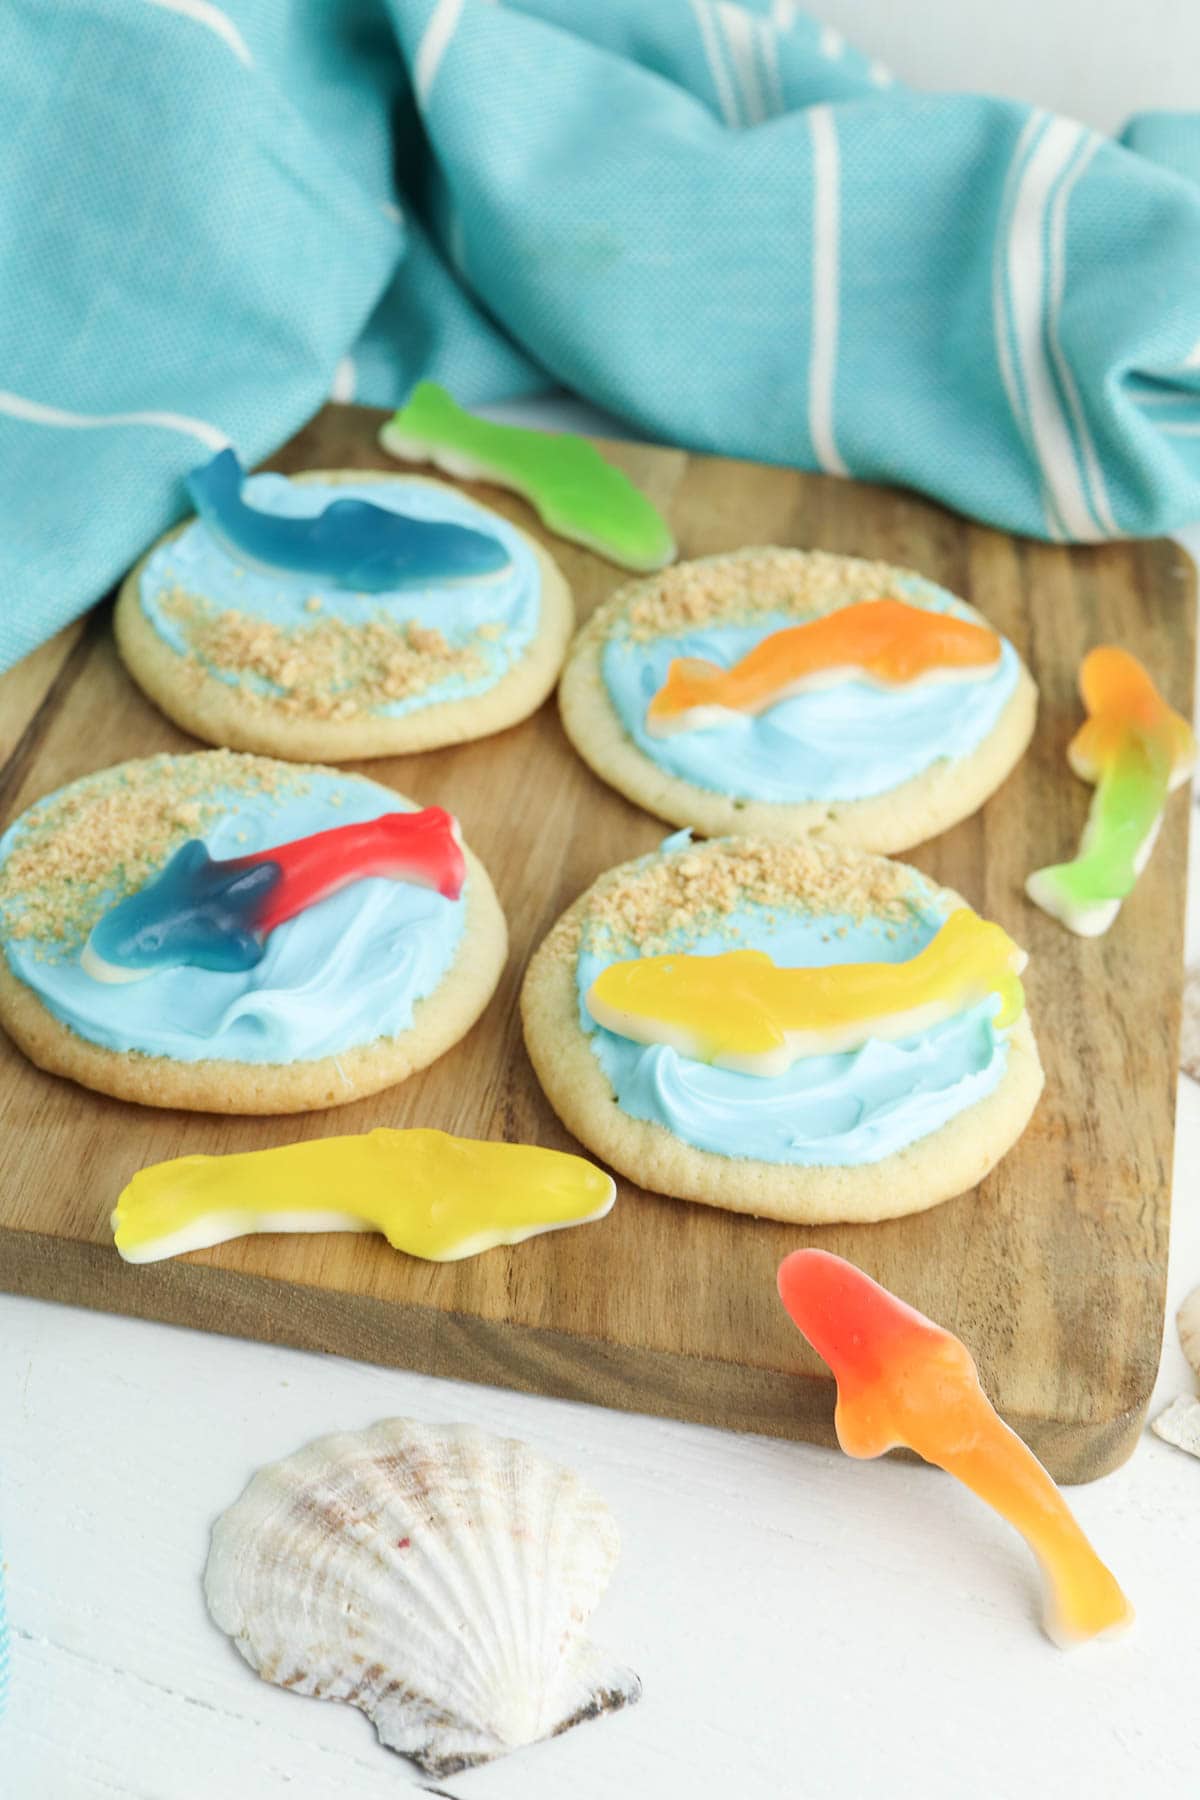 Shark cookie with gummy shark and graham cracker sand on wooden board